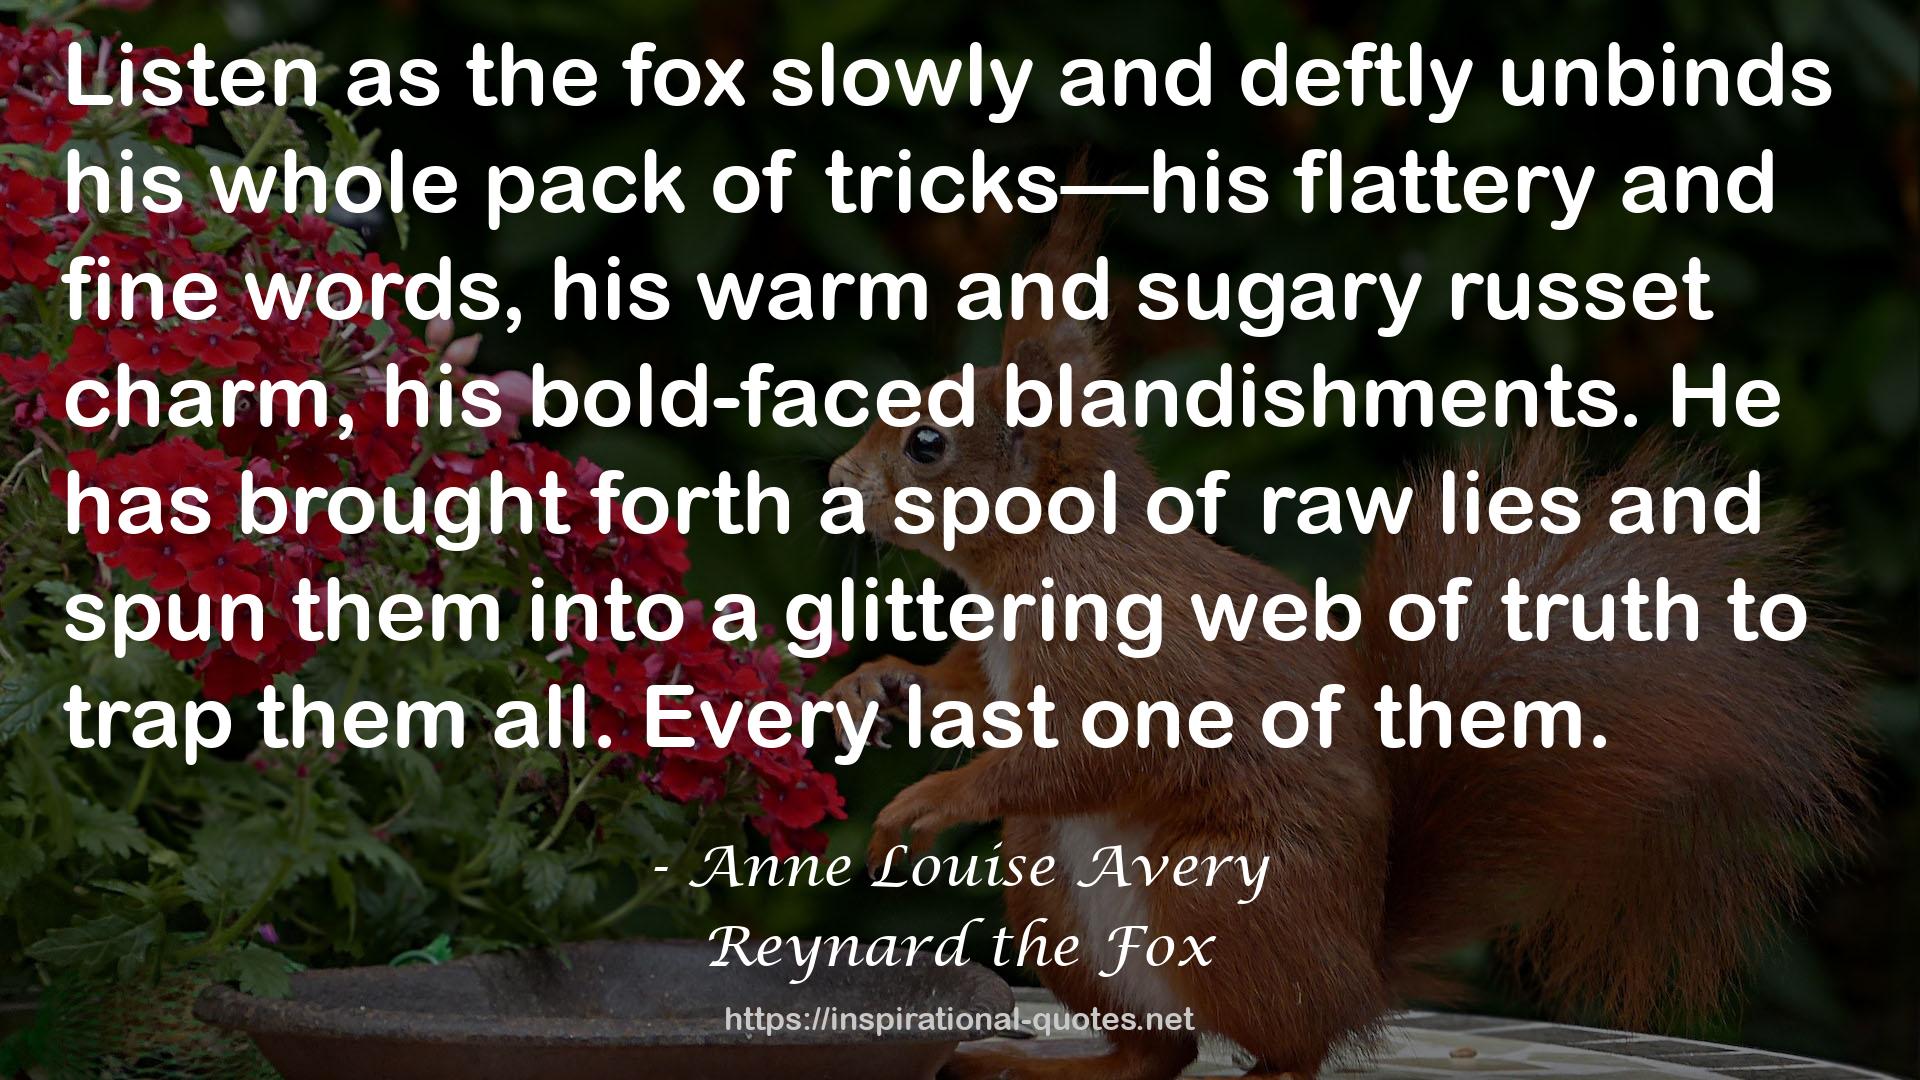 Anne Louise Avery QUOTES